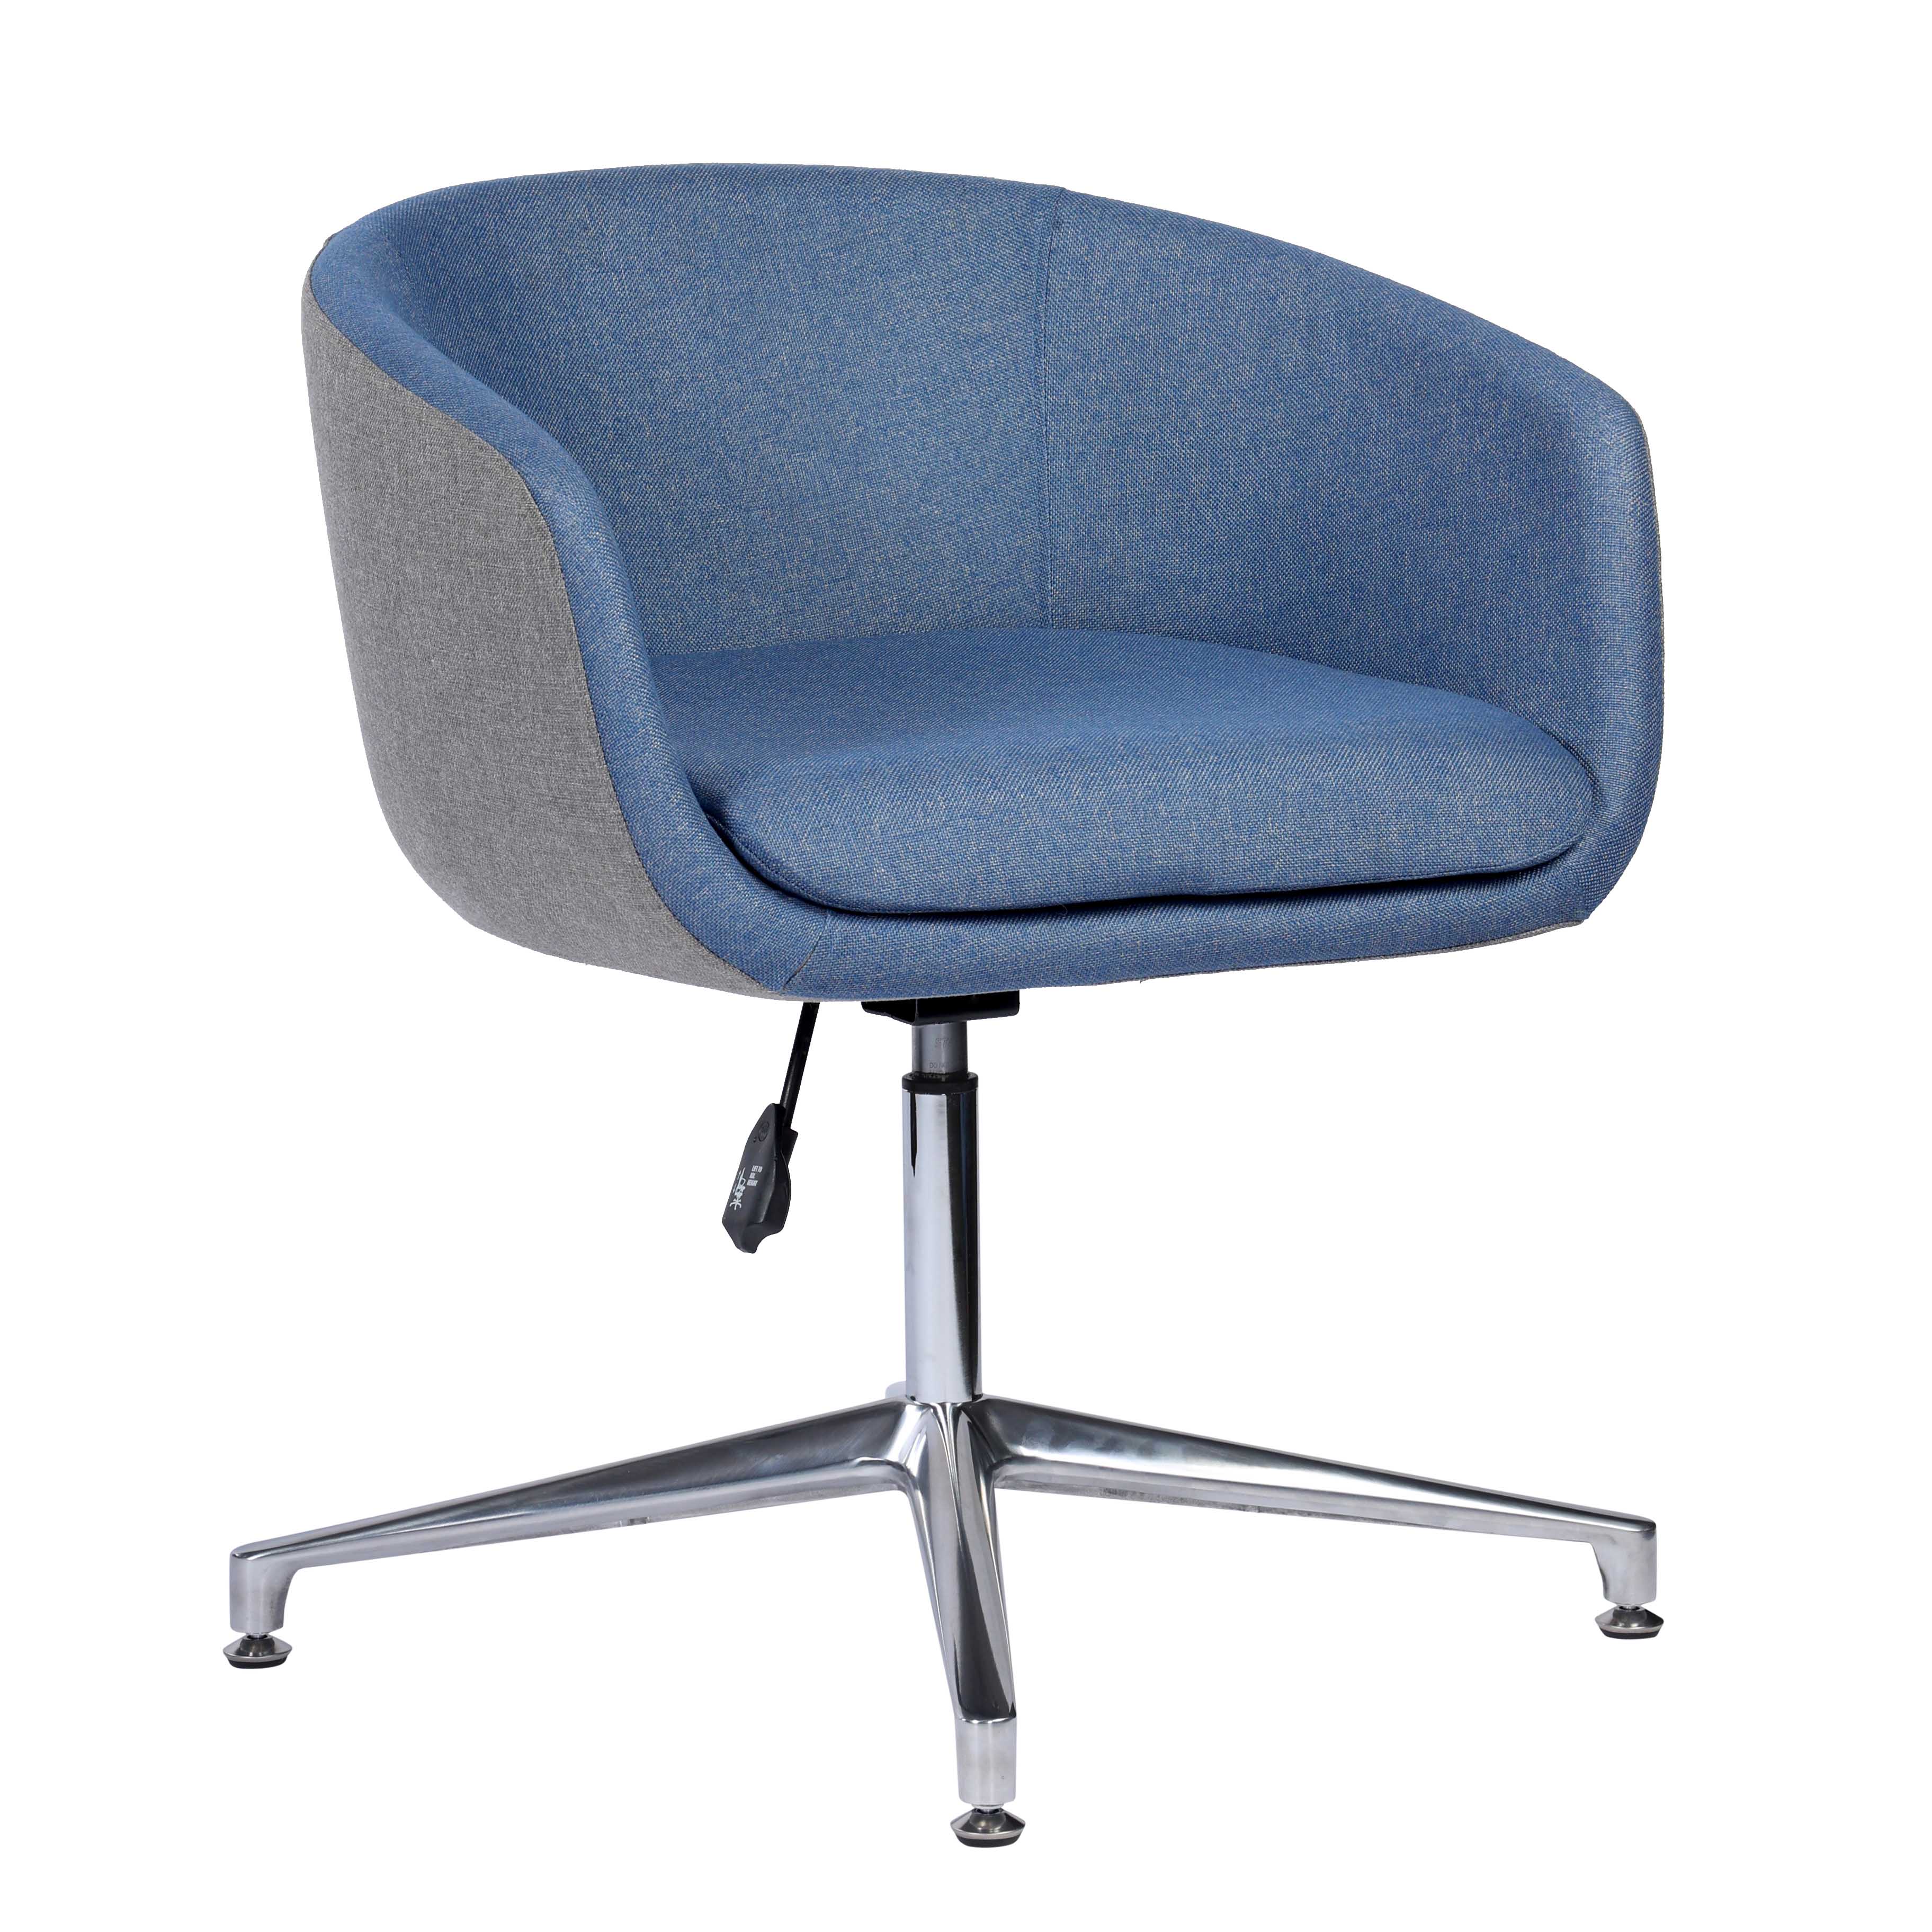 Emilia Modern Upholstered Adjustable Office Chair With Aluminum Base - Blue